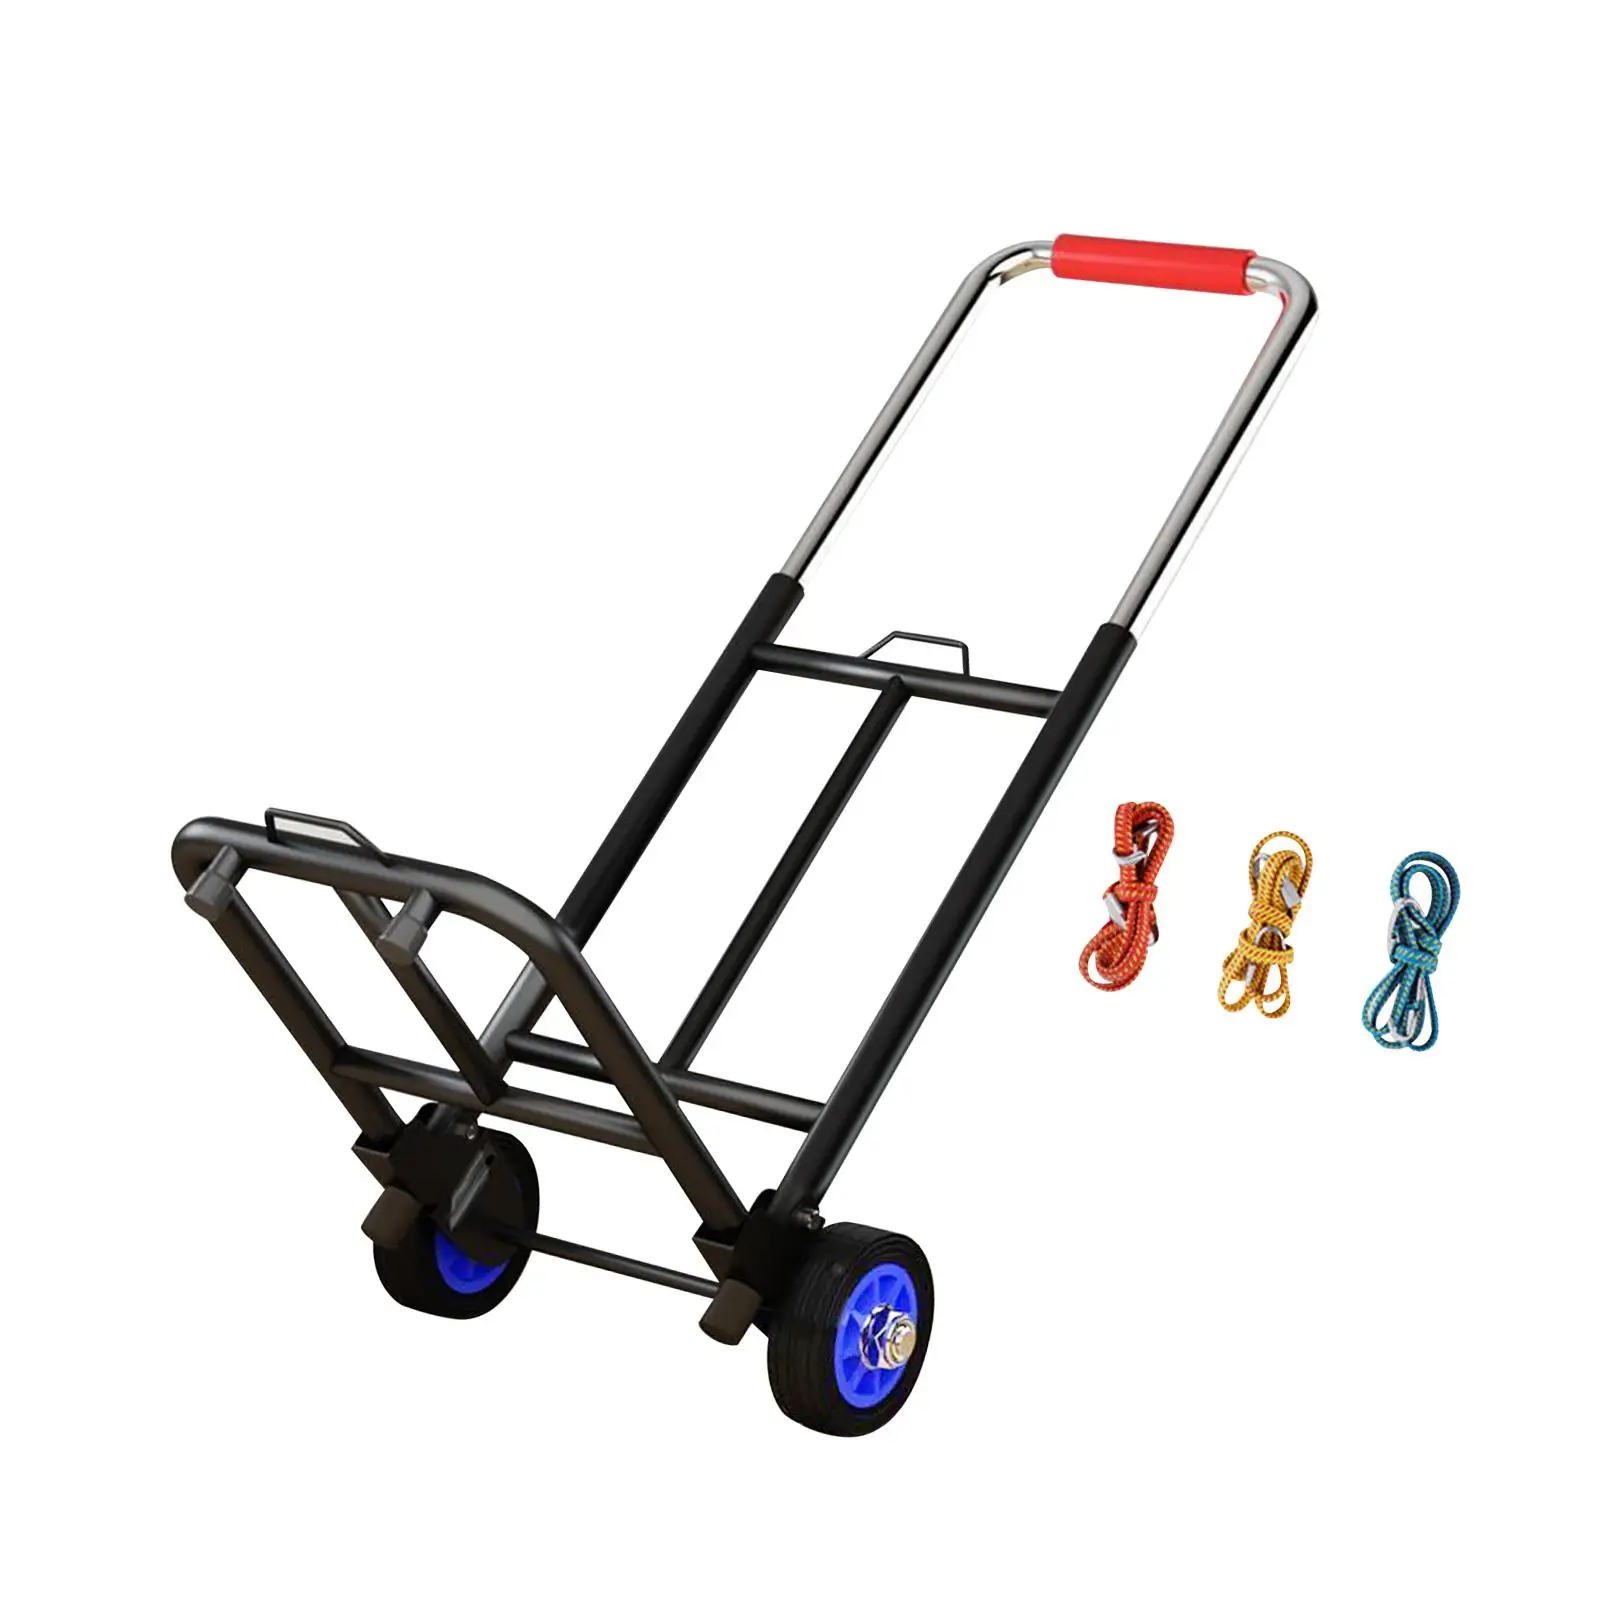 Folding Hand Truck Adjustable Folding Hand Cart Heavy Duty Luggage Cart for Office Moving Shopping Travel Transportation